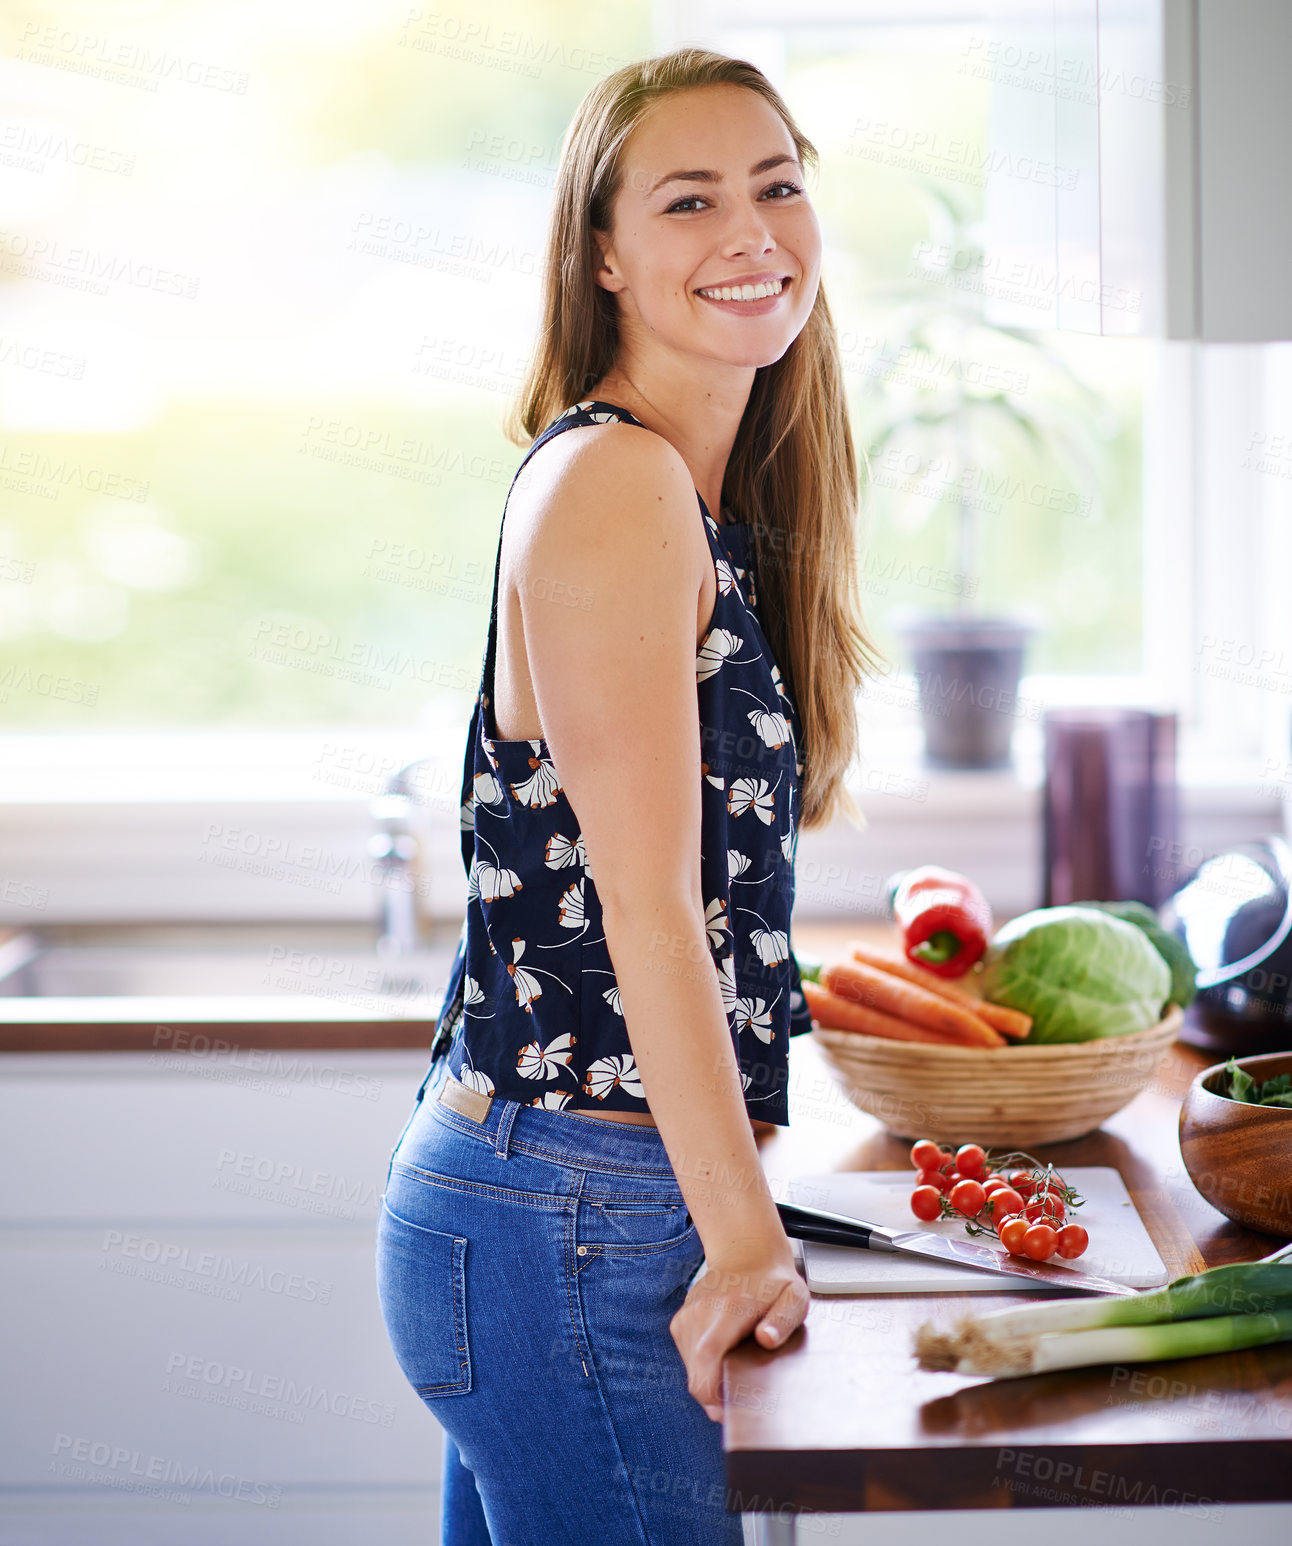 Buy stock photo Shot of a young woman preparing a meal in her kitchen